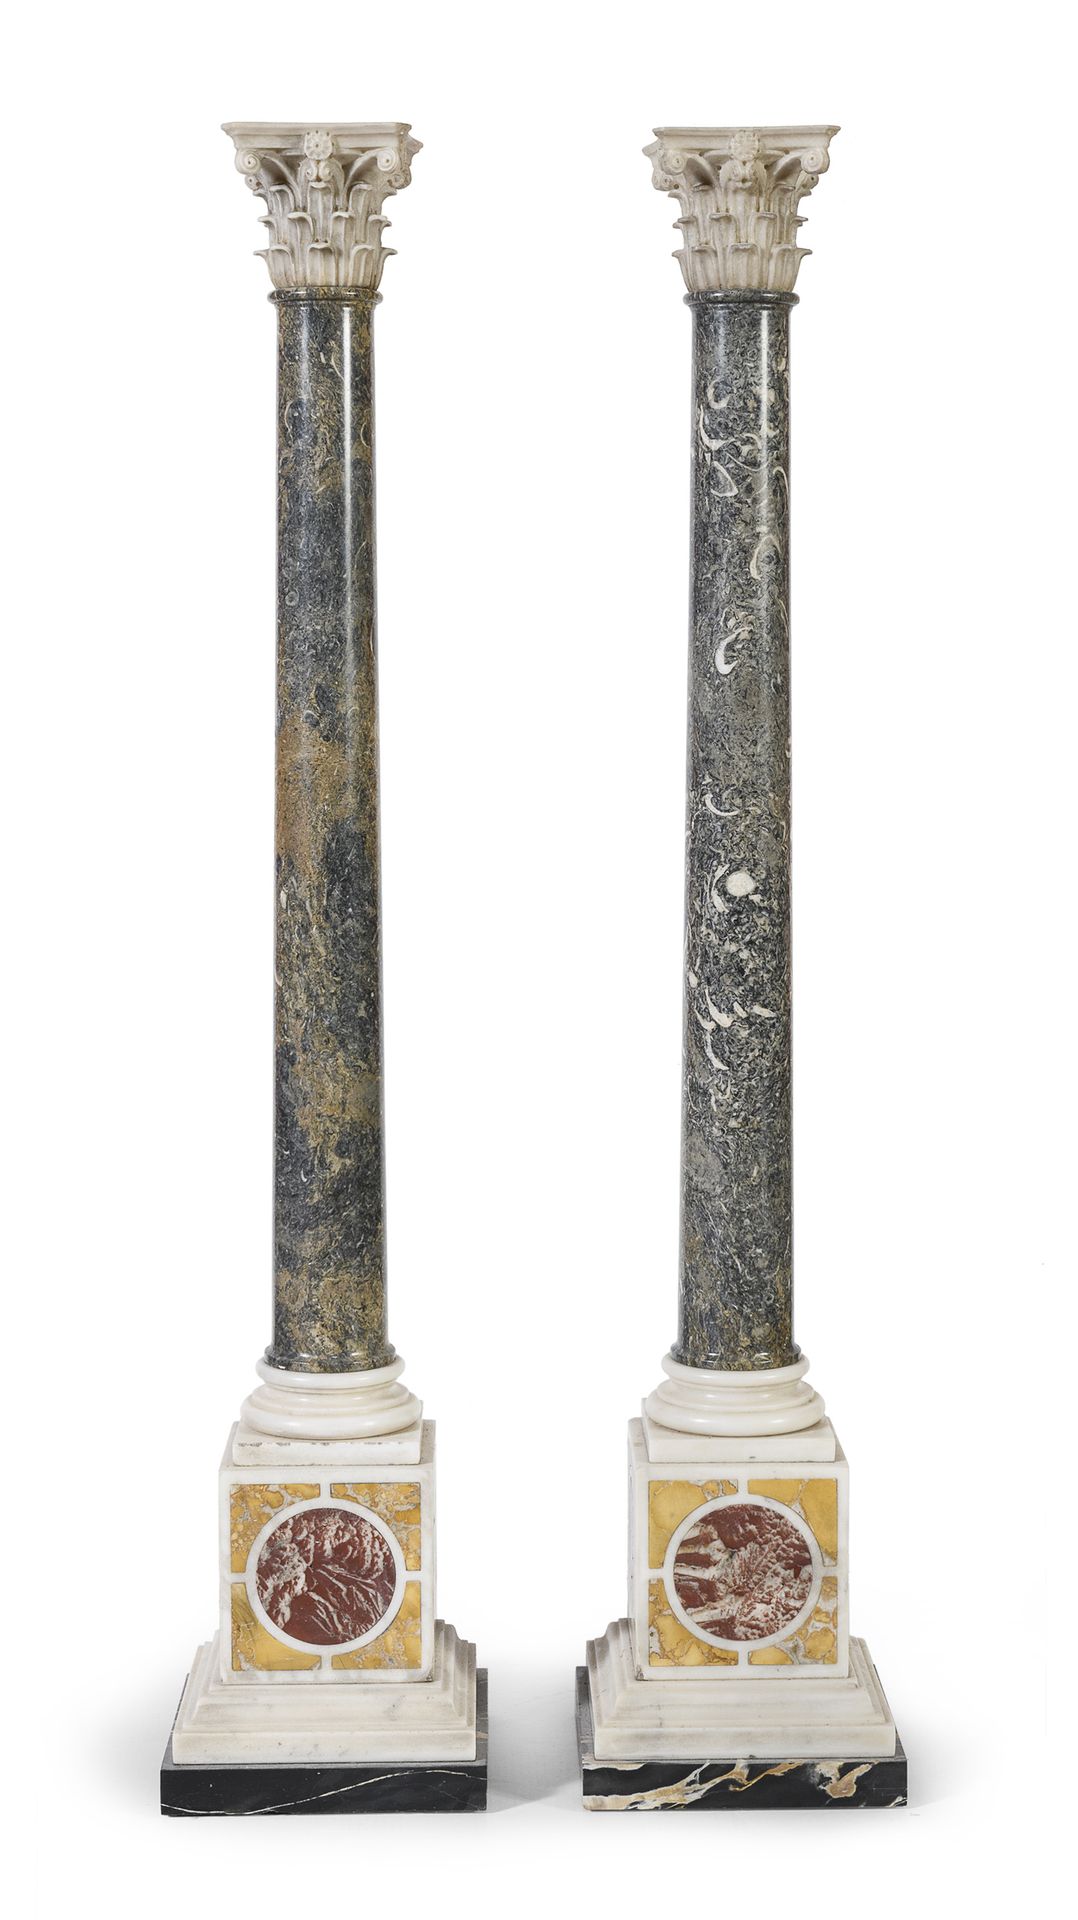 Null PAIR OF MODELS OF MARBLE COLUMNS, 19TH CENTURY